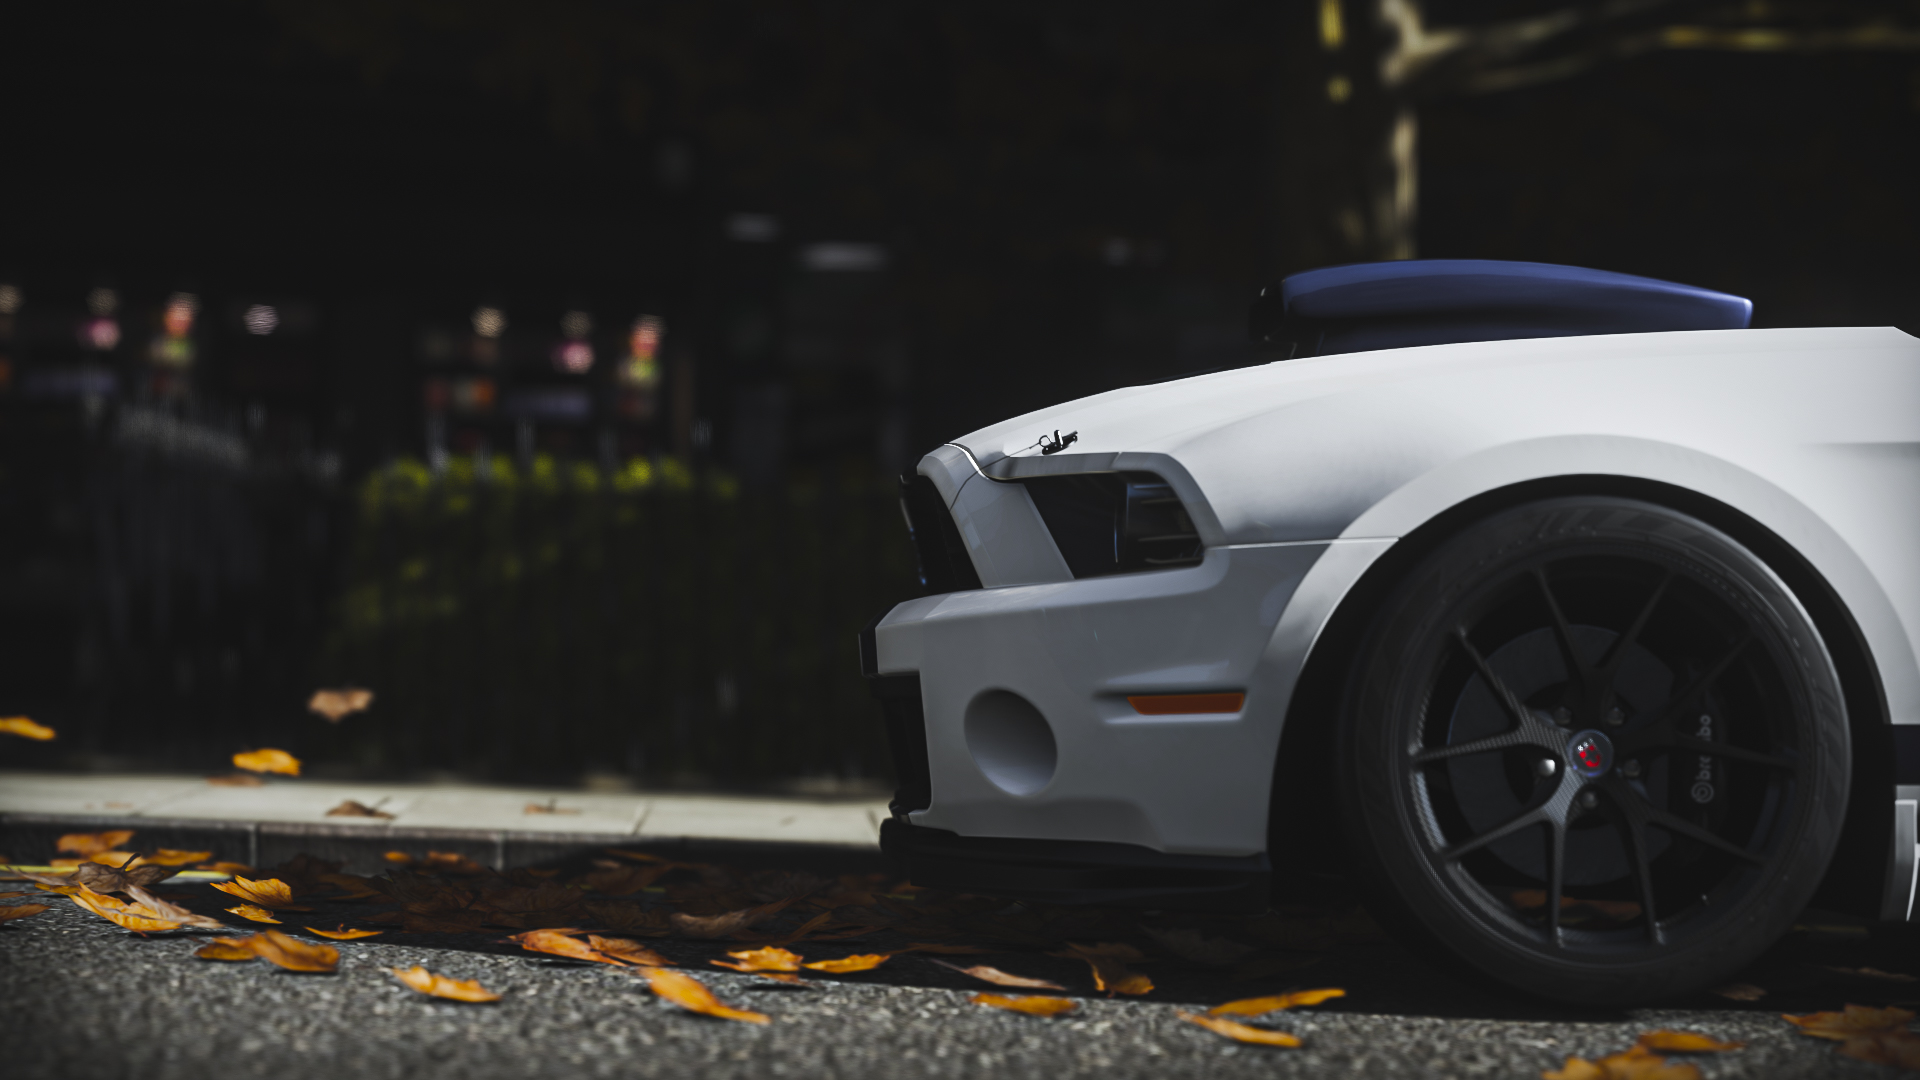 Ford Mustang GT Shelby GT500 Ford Shelby GT500 Ford Mustang Car Forza Forza Horizon 4 Video Games Ca 1920x1080